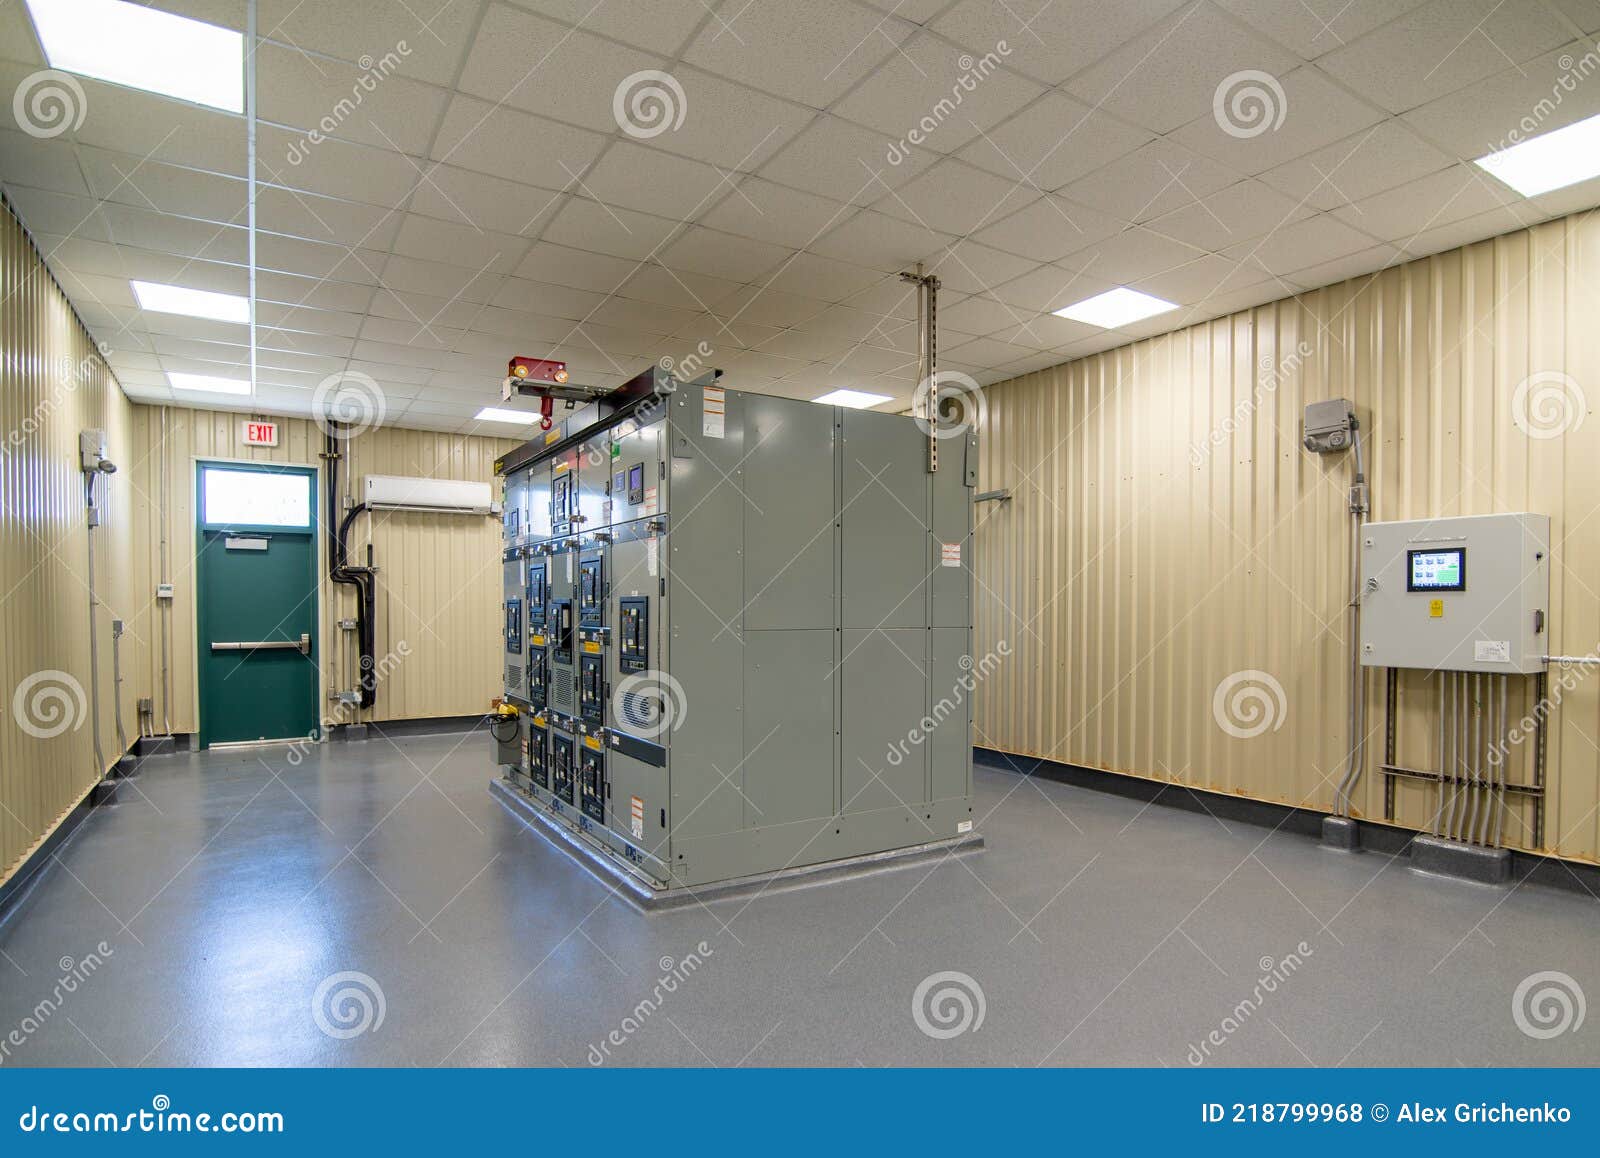 electric voltage control room at industrial plant